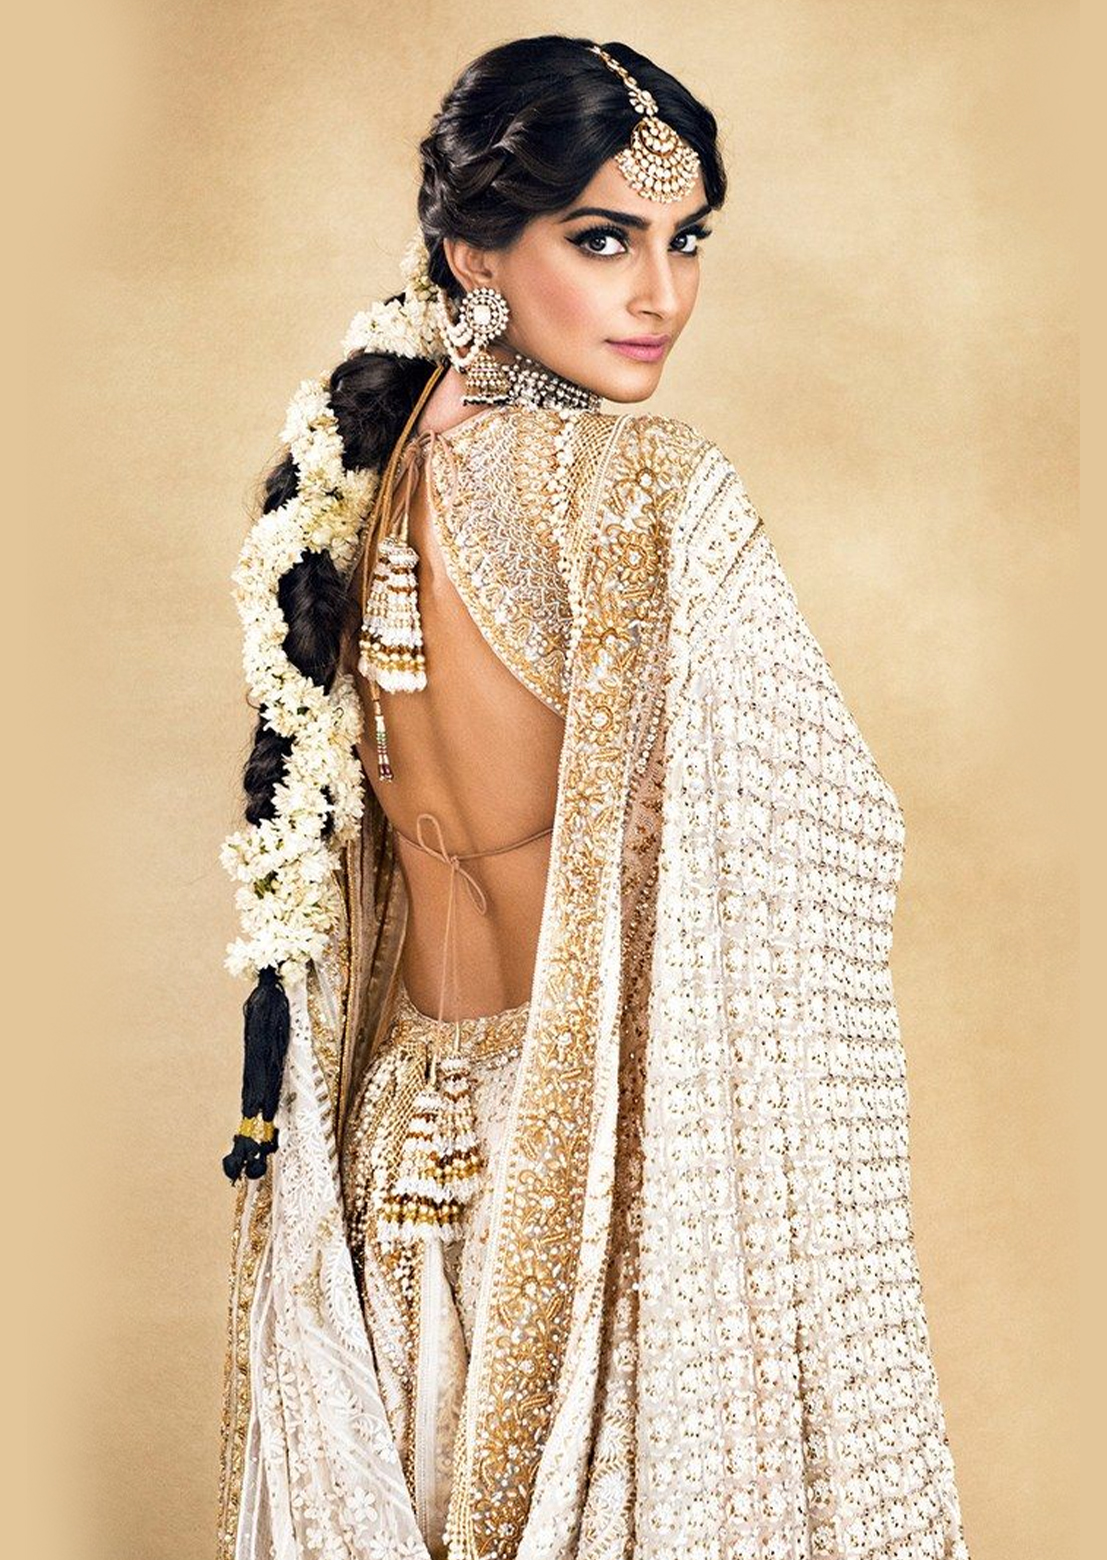 Download Good Indian Bridal Hairstyles - Hair Styles With Gown PNG Image  with No Background - PNGkey.com